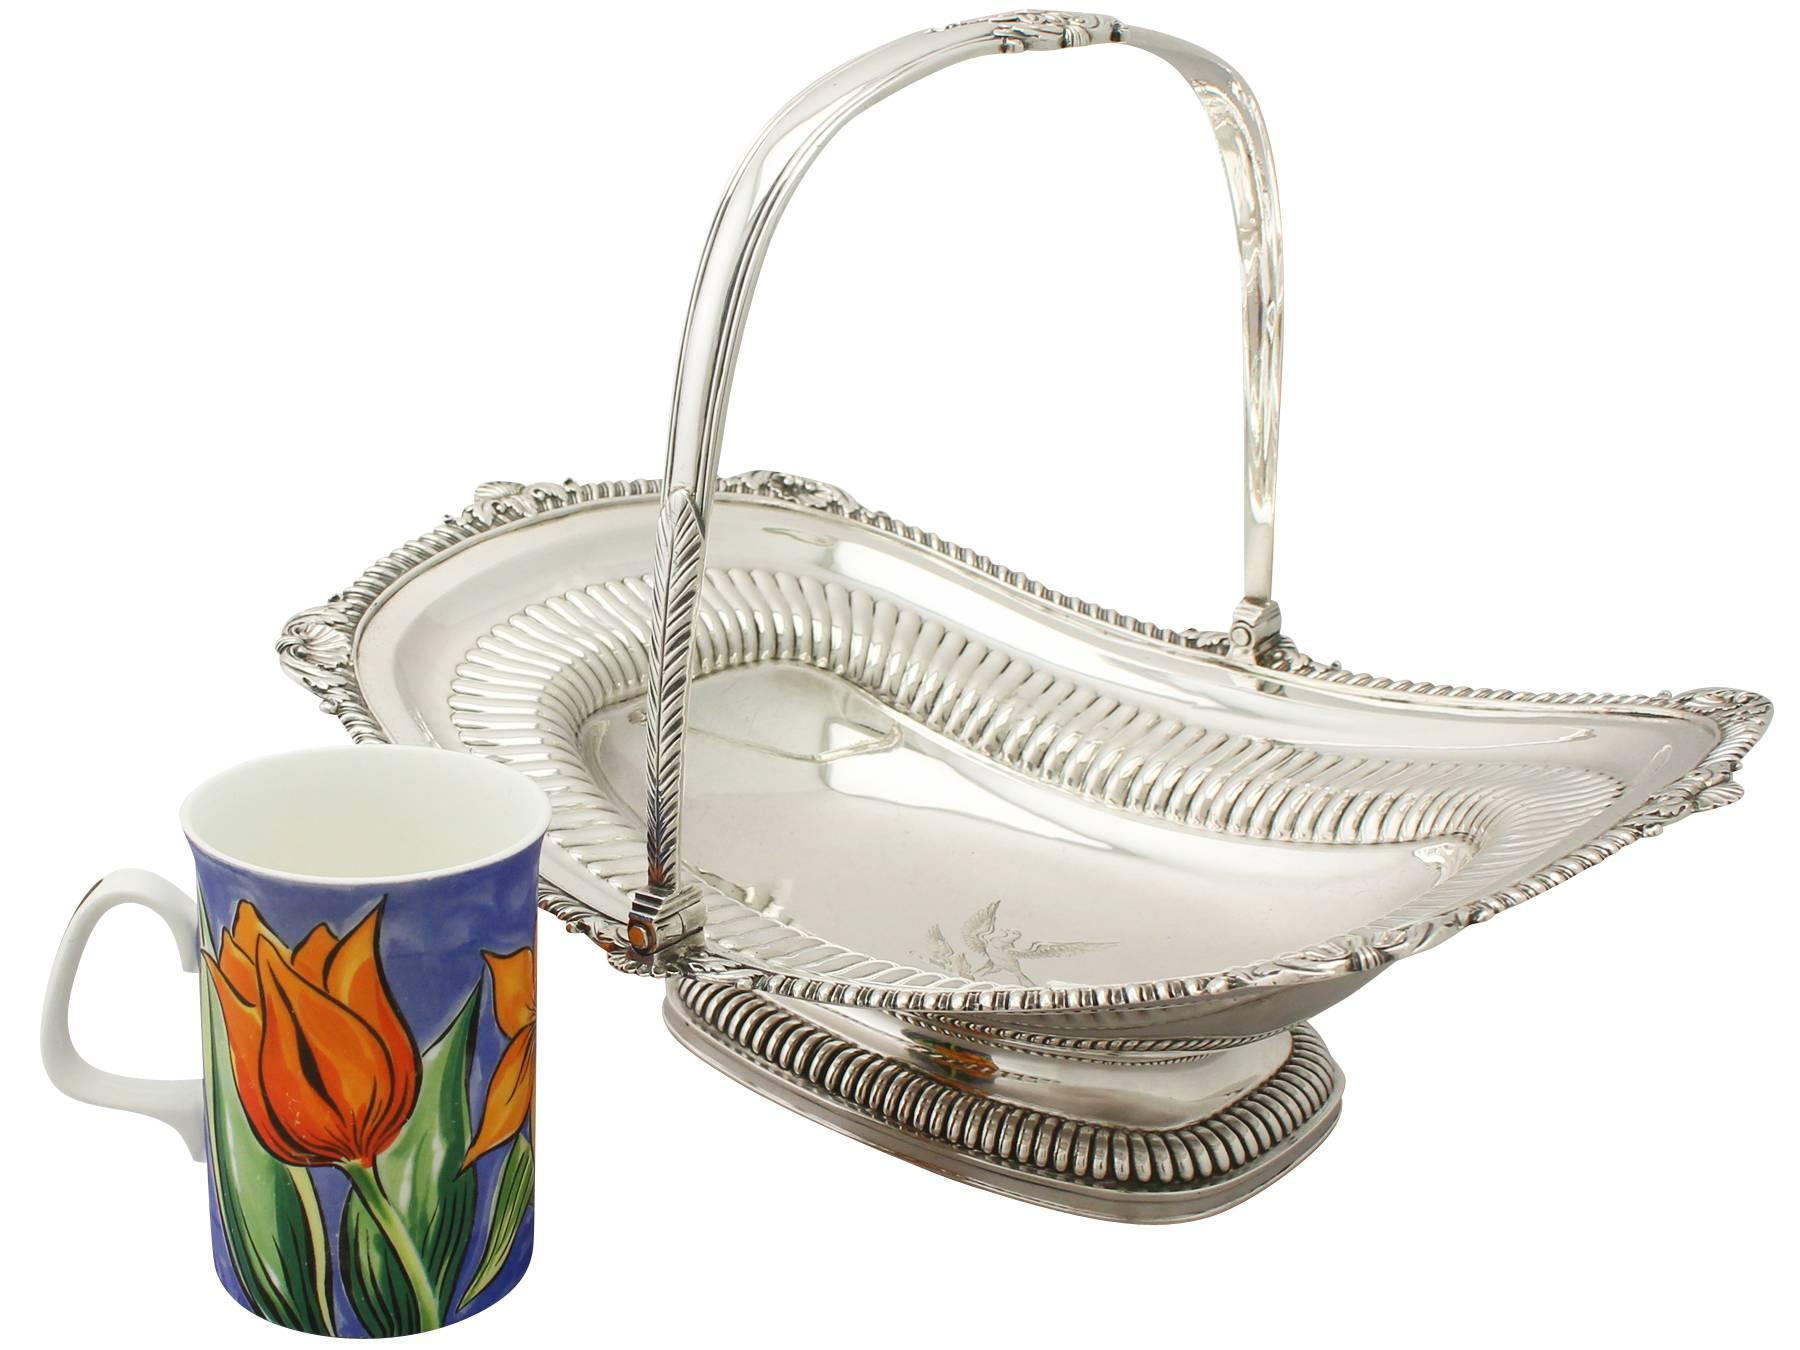 An exceptional, fine and impressive antique Georgian English sterling silver swing handled cake basket made by Paul Storr; an addition to our ornamental silverware collection.

This exceptional antique George III sterling silver cake basket has a